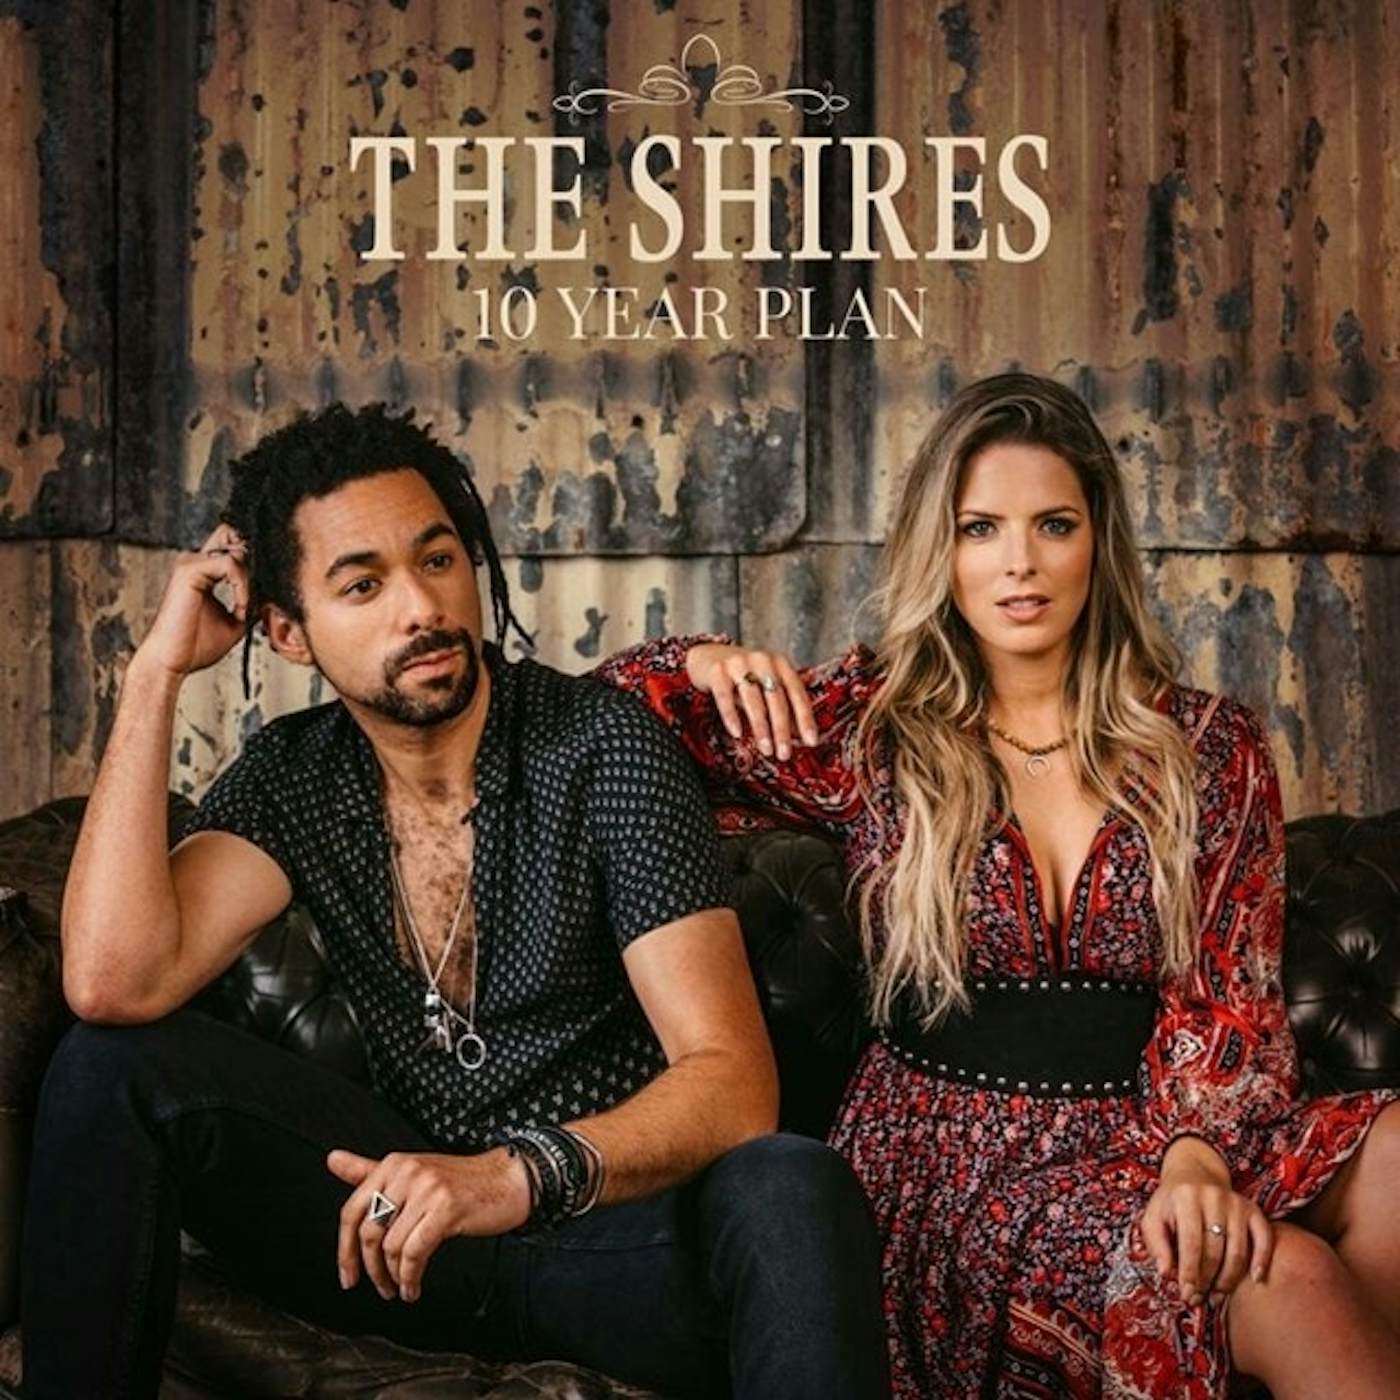 The Shires 10 Year Plan Vinyl Record